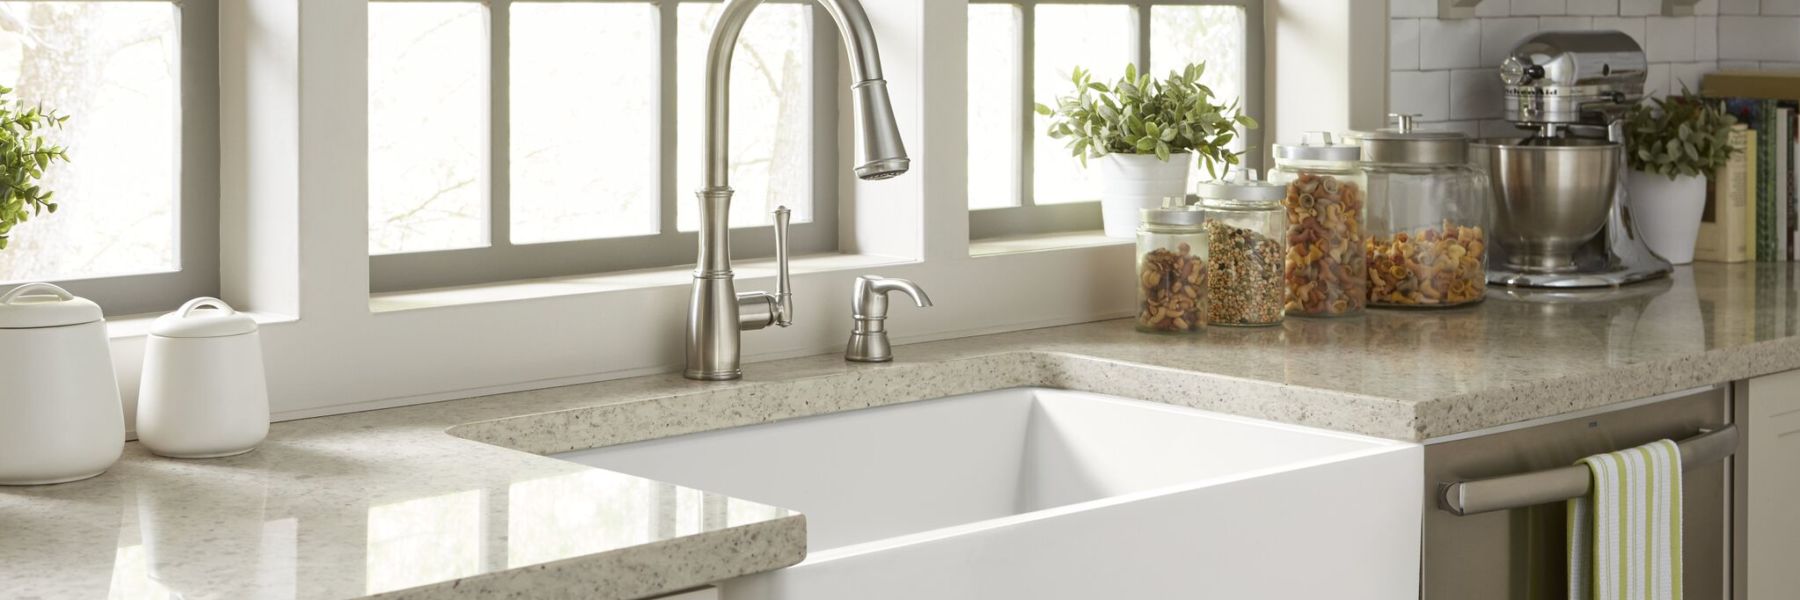 best material for kitchen sink uk